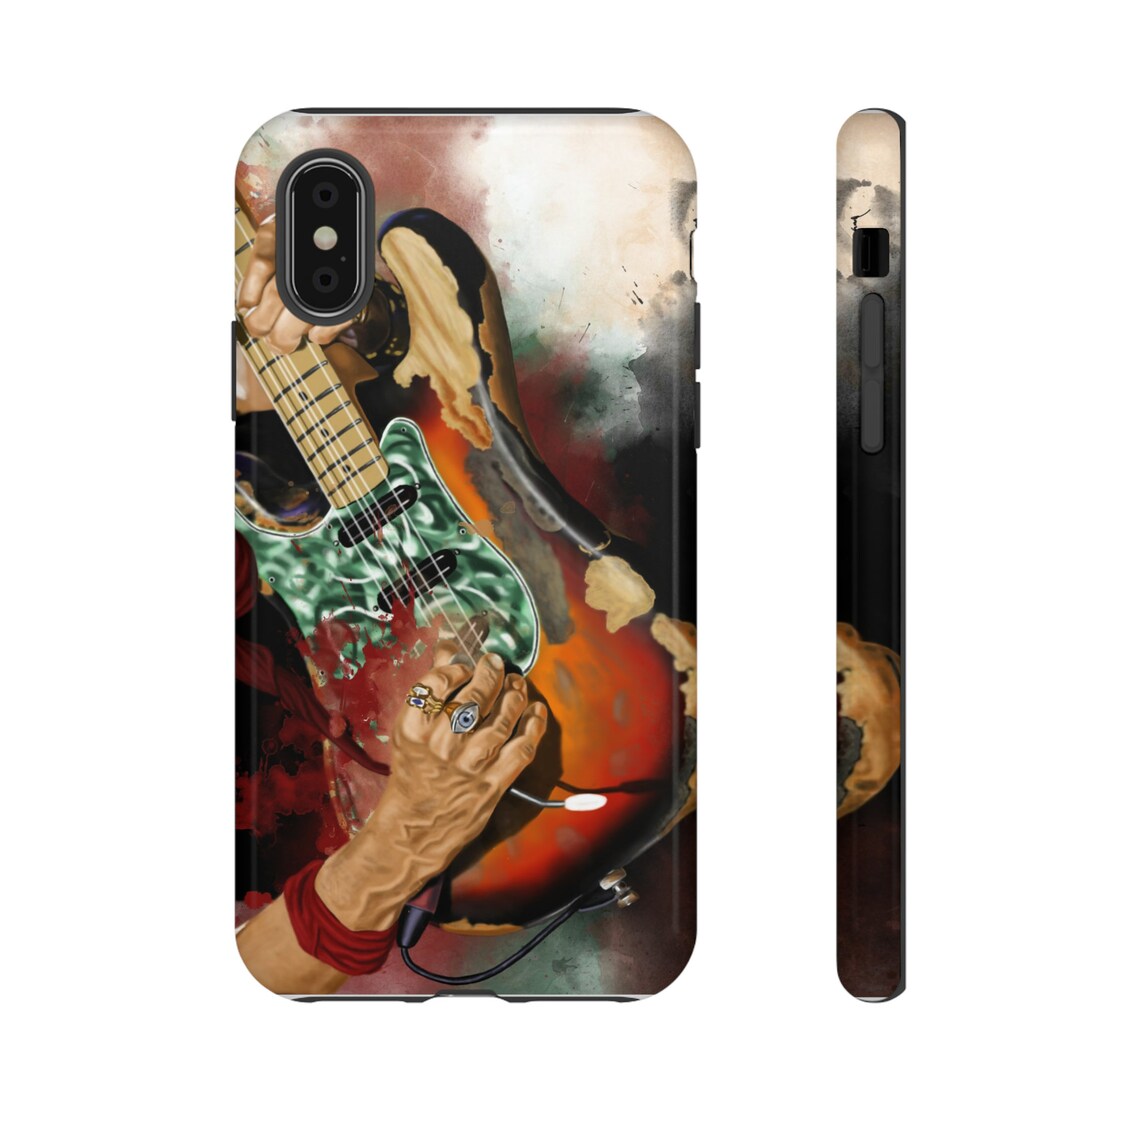 Digital painting of vintage electric guitar with hands printed on iphone case